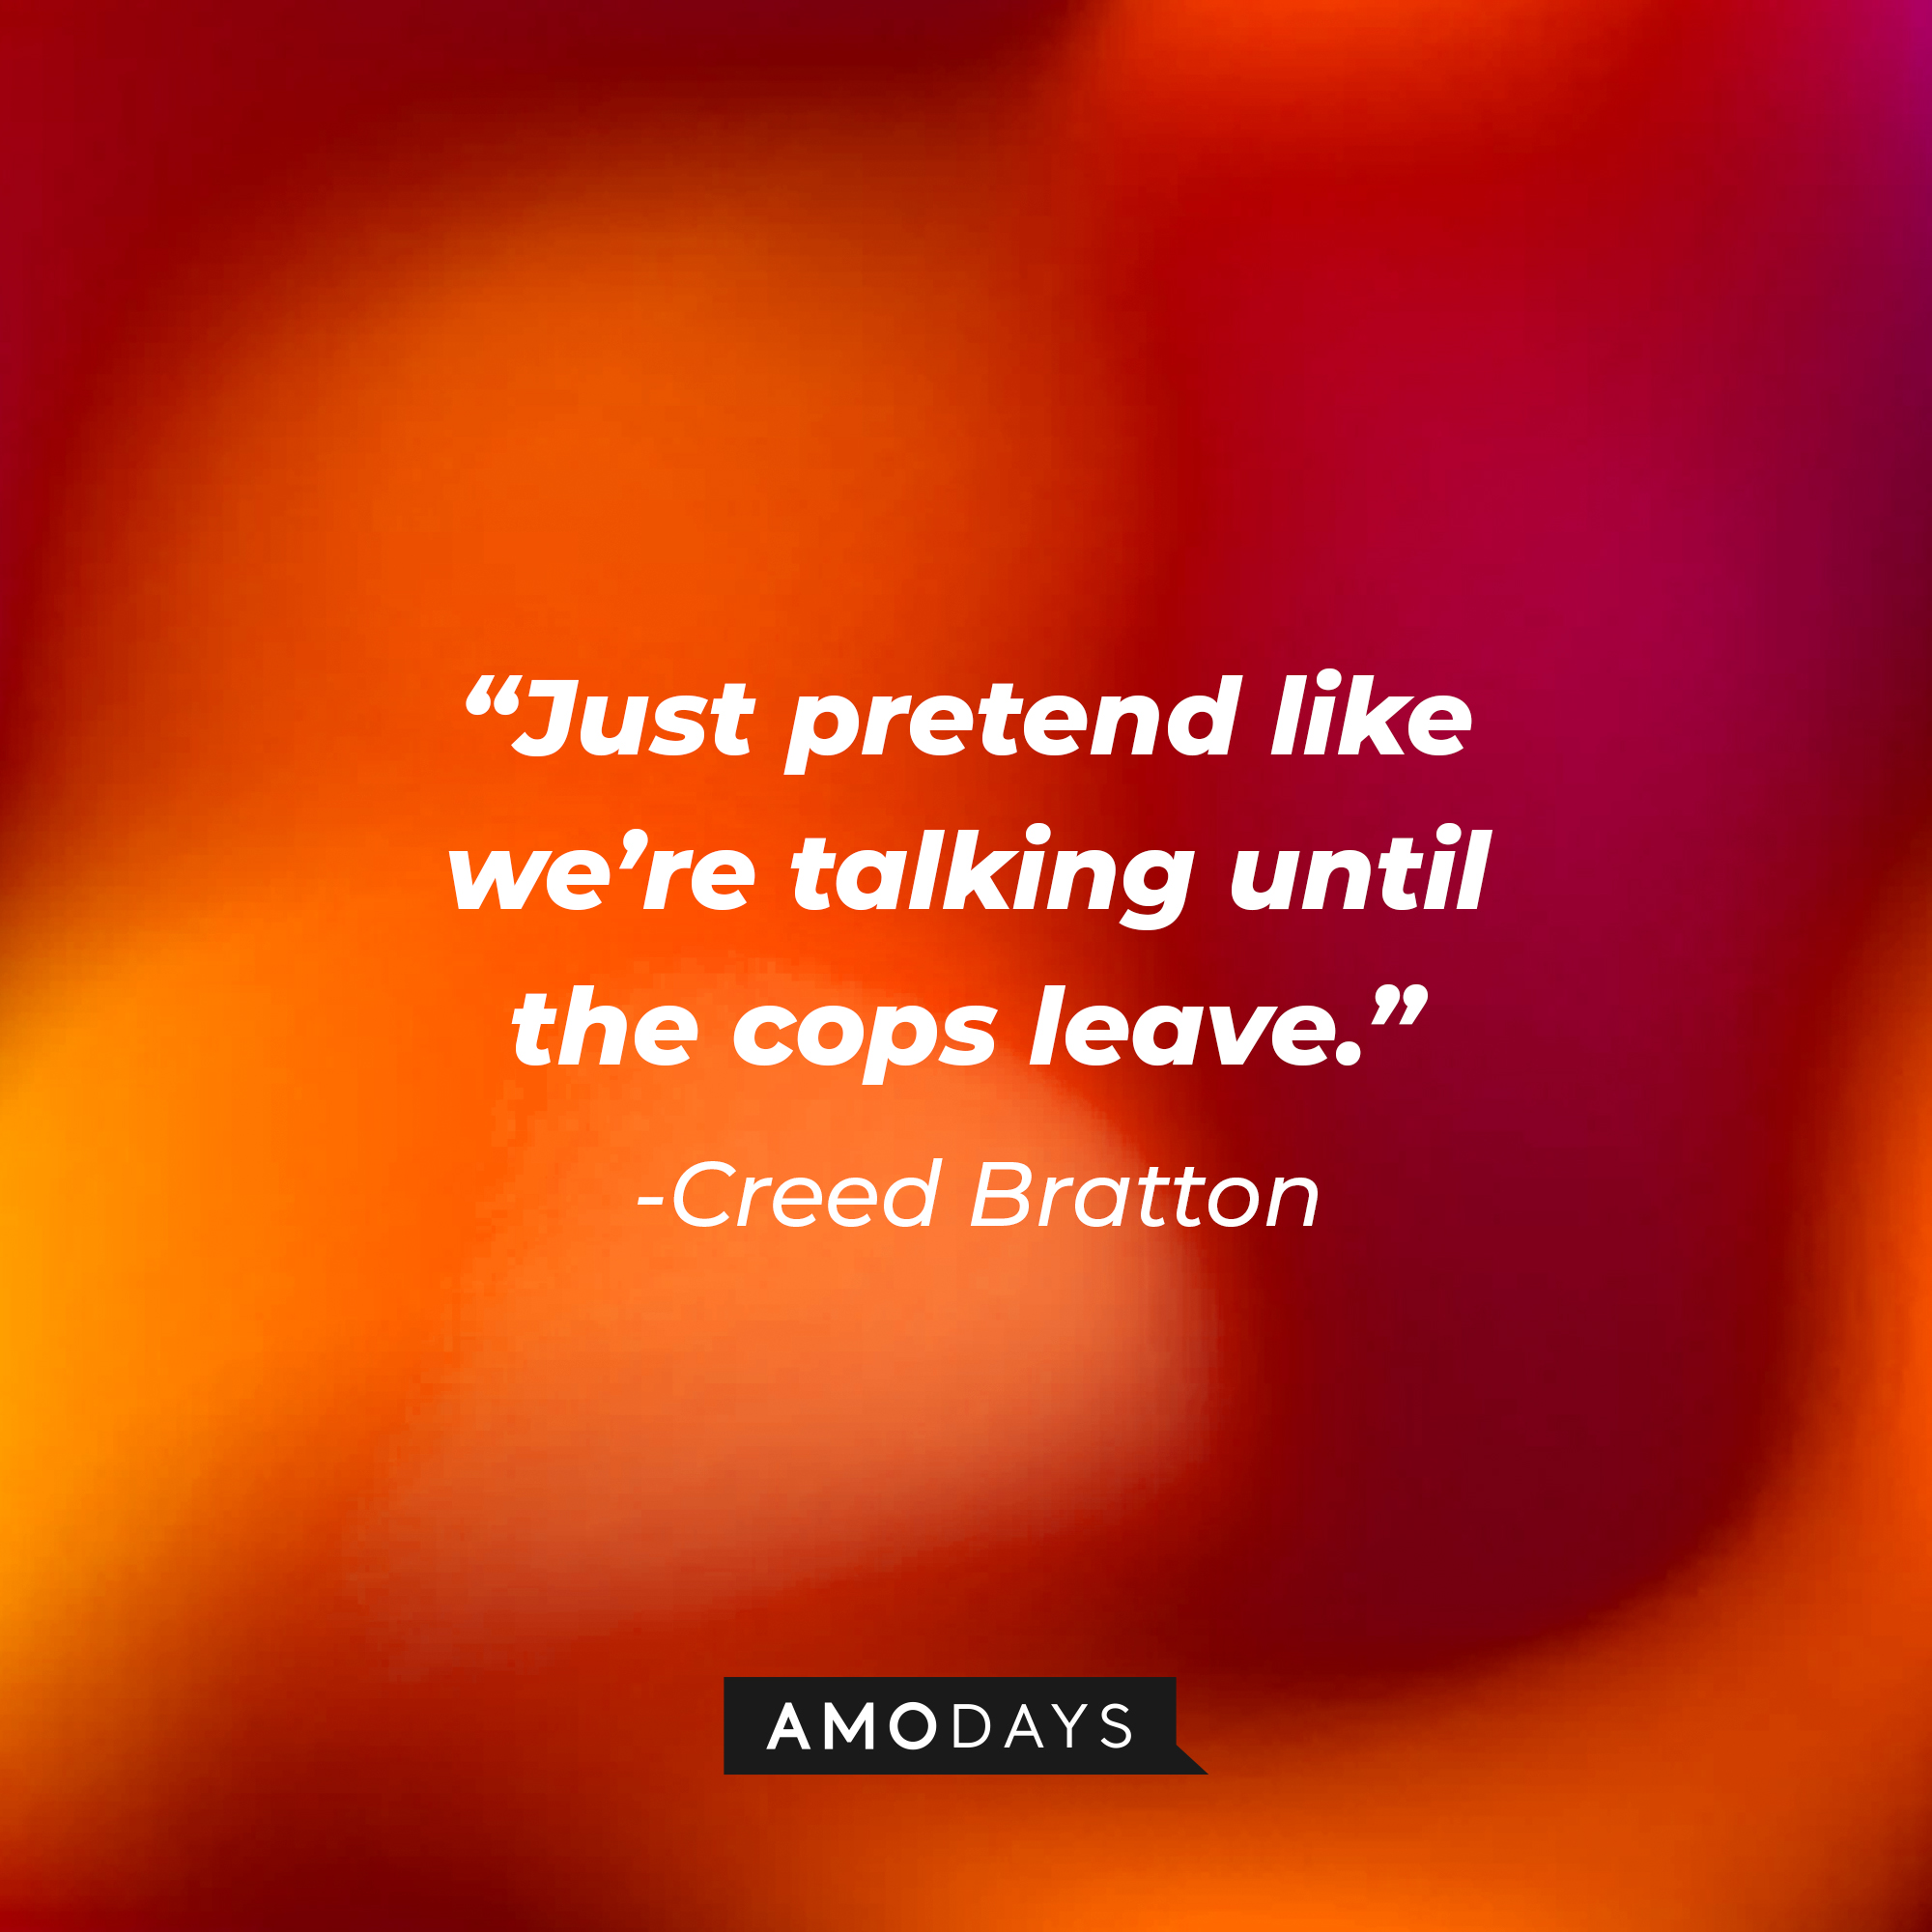 Creed Bratton's quote: "Just pretend like we're talking until the cops leave." | Source: Amodays